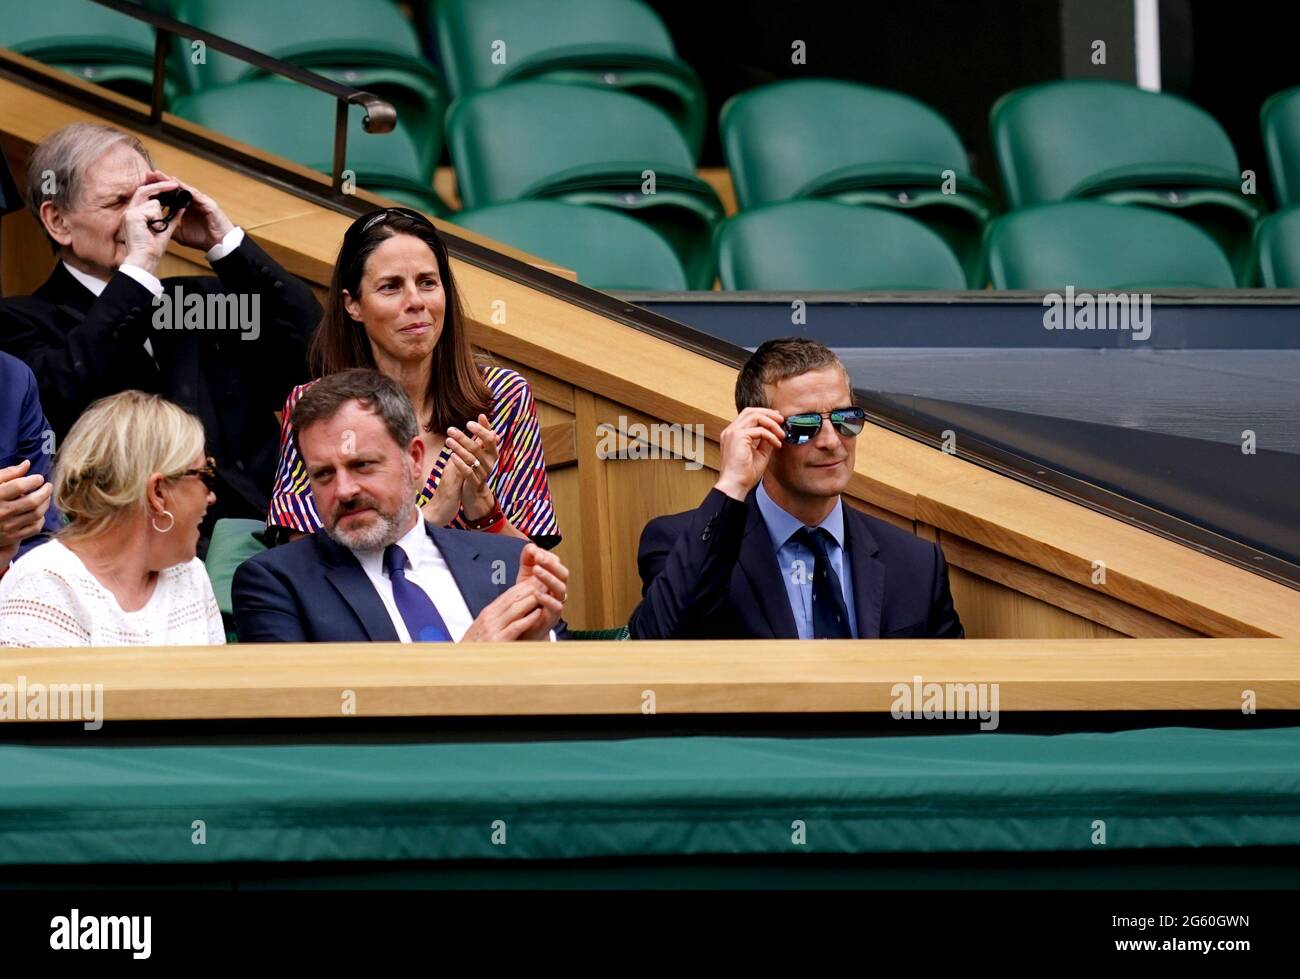 Who's who in the Royal Box on Centre Court?